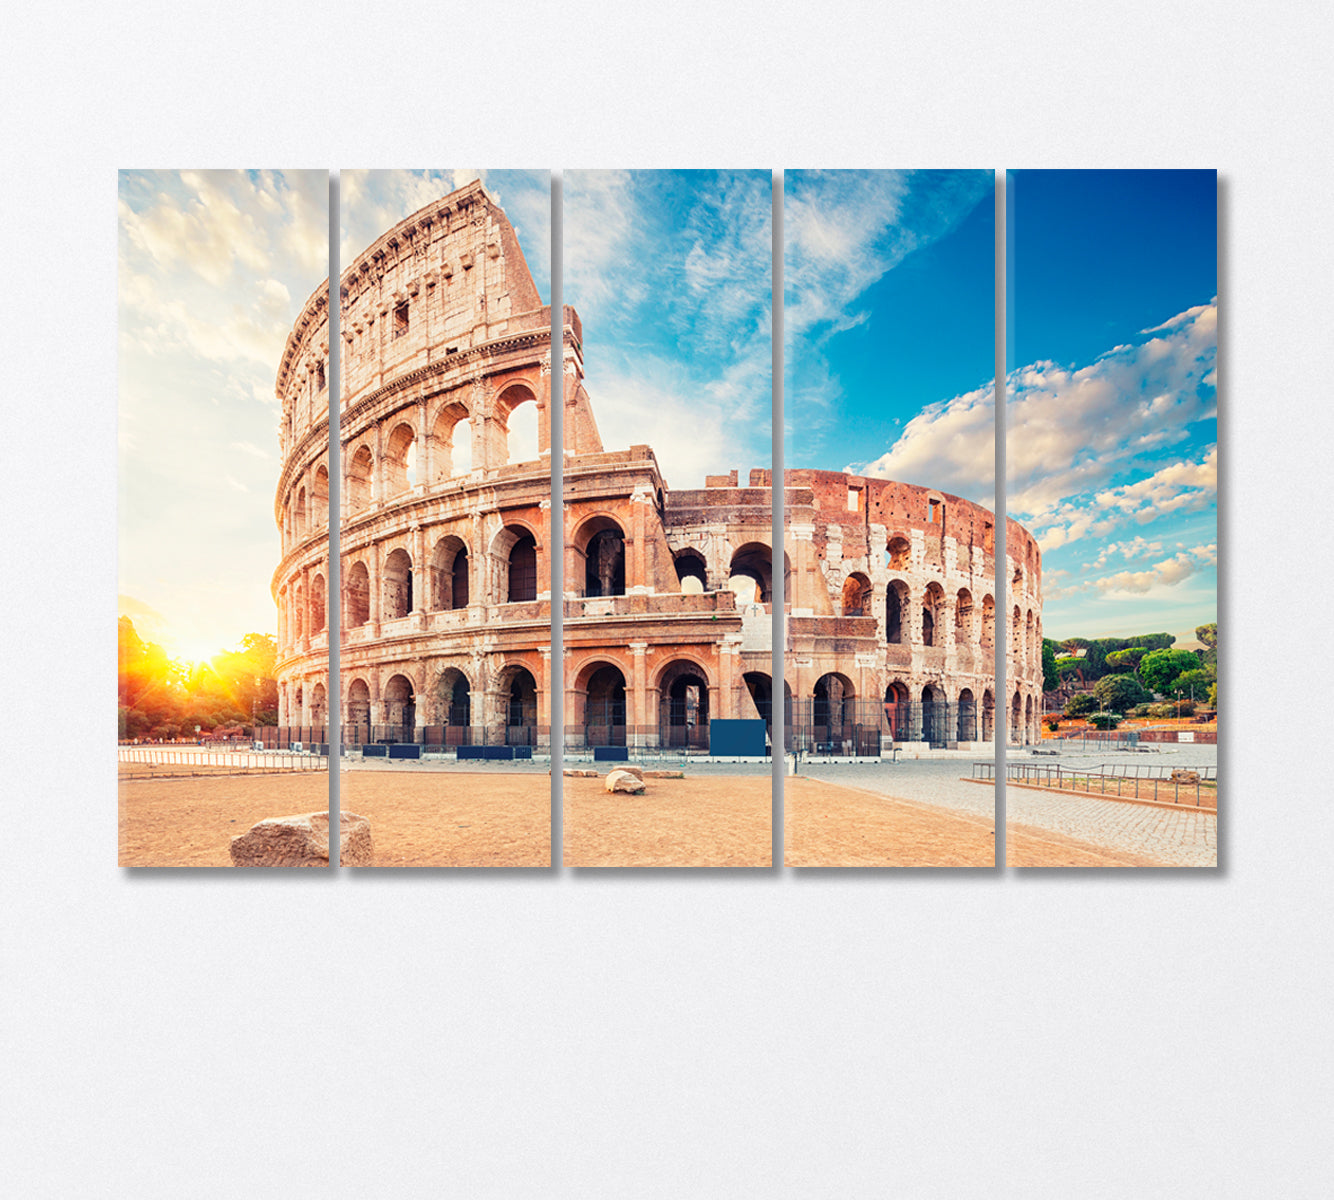 Colosseum or Flavian Amphitheater Rome Italy Canvas Print-Canvas Print-CetArt-5 Panels-36x24 inches-CetArt